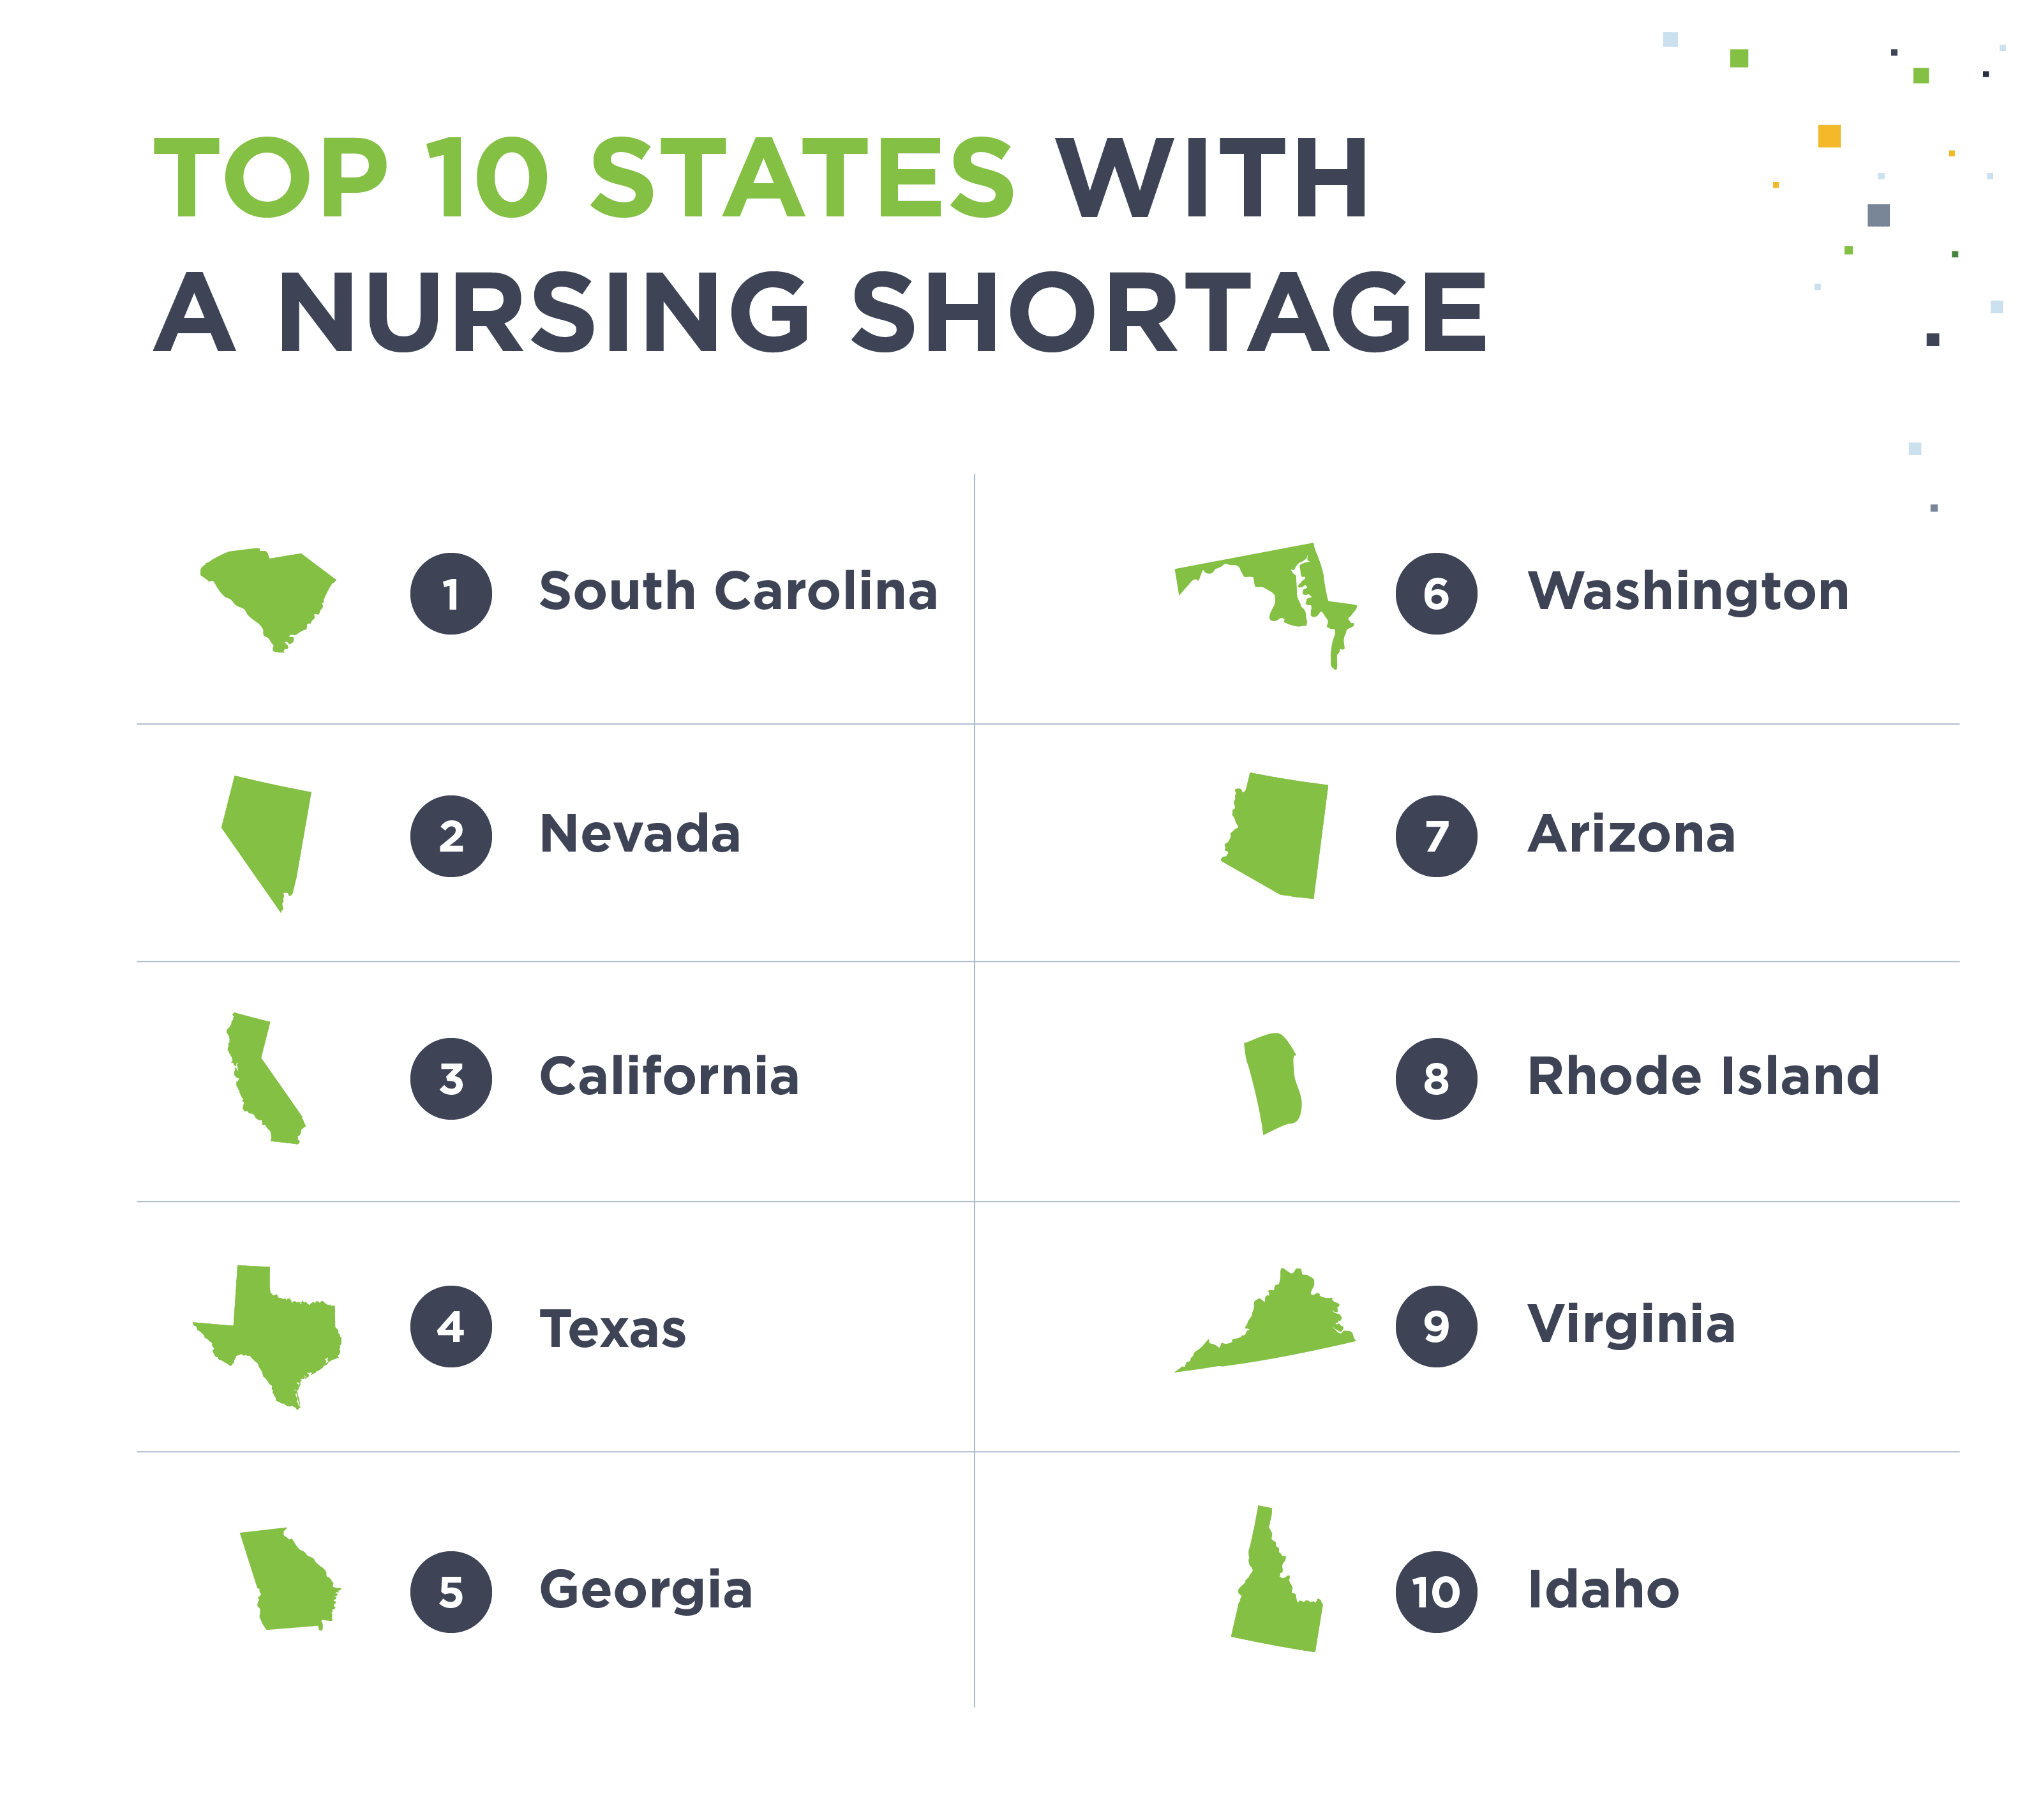 List of the top 10 states with a nursing shortage.